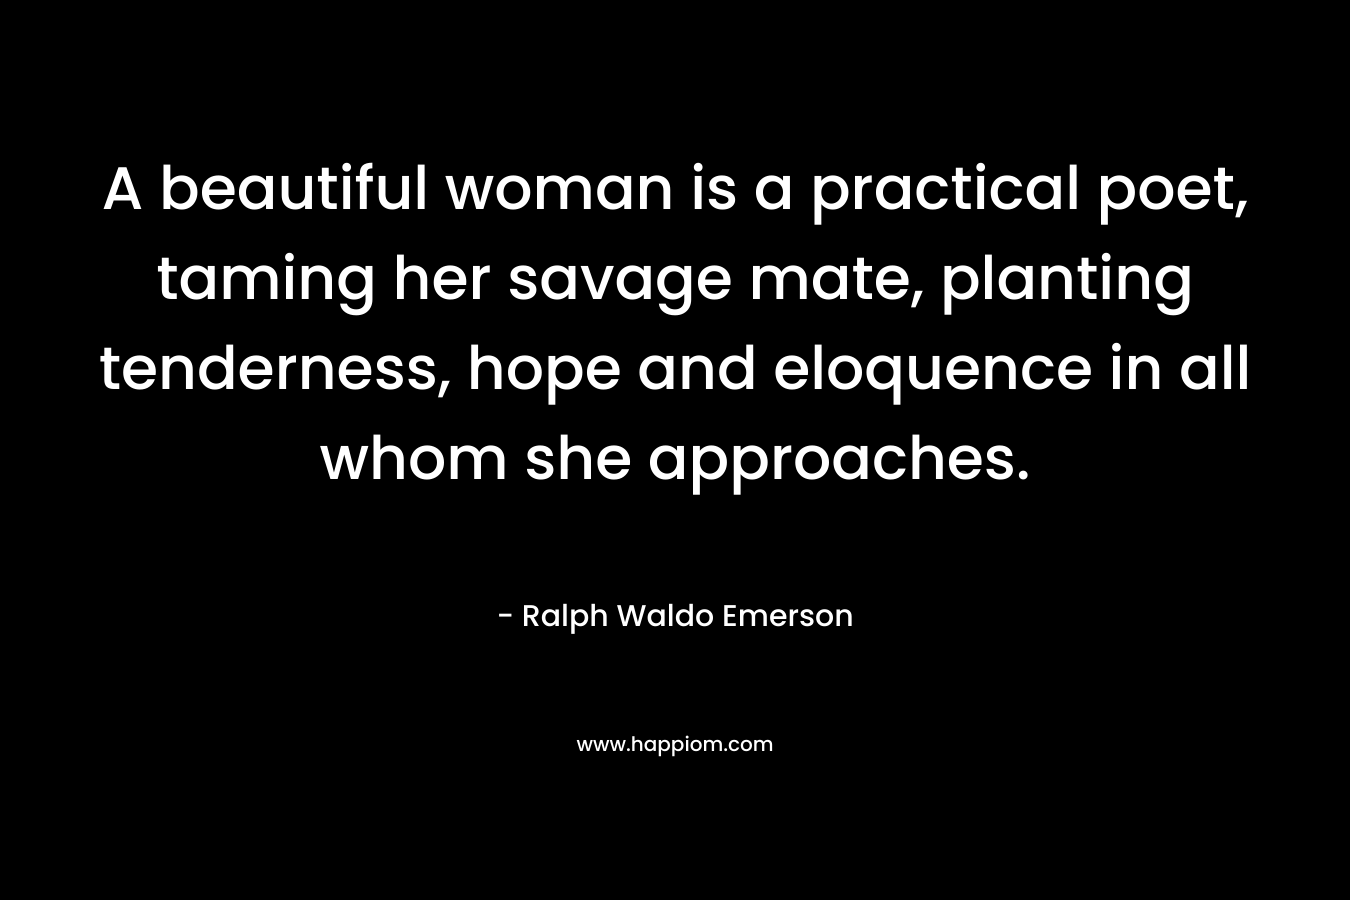 A beautiful woman is a practical poet, taming her savage mate, planting tenderness, hope and eloquence in all whom she approaches. – Ralph Waldo Emerson